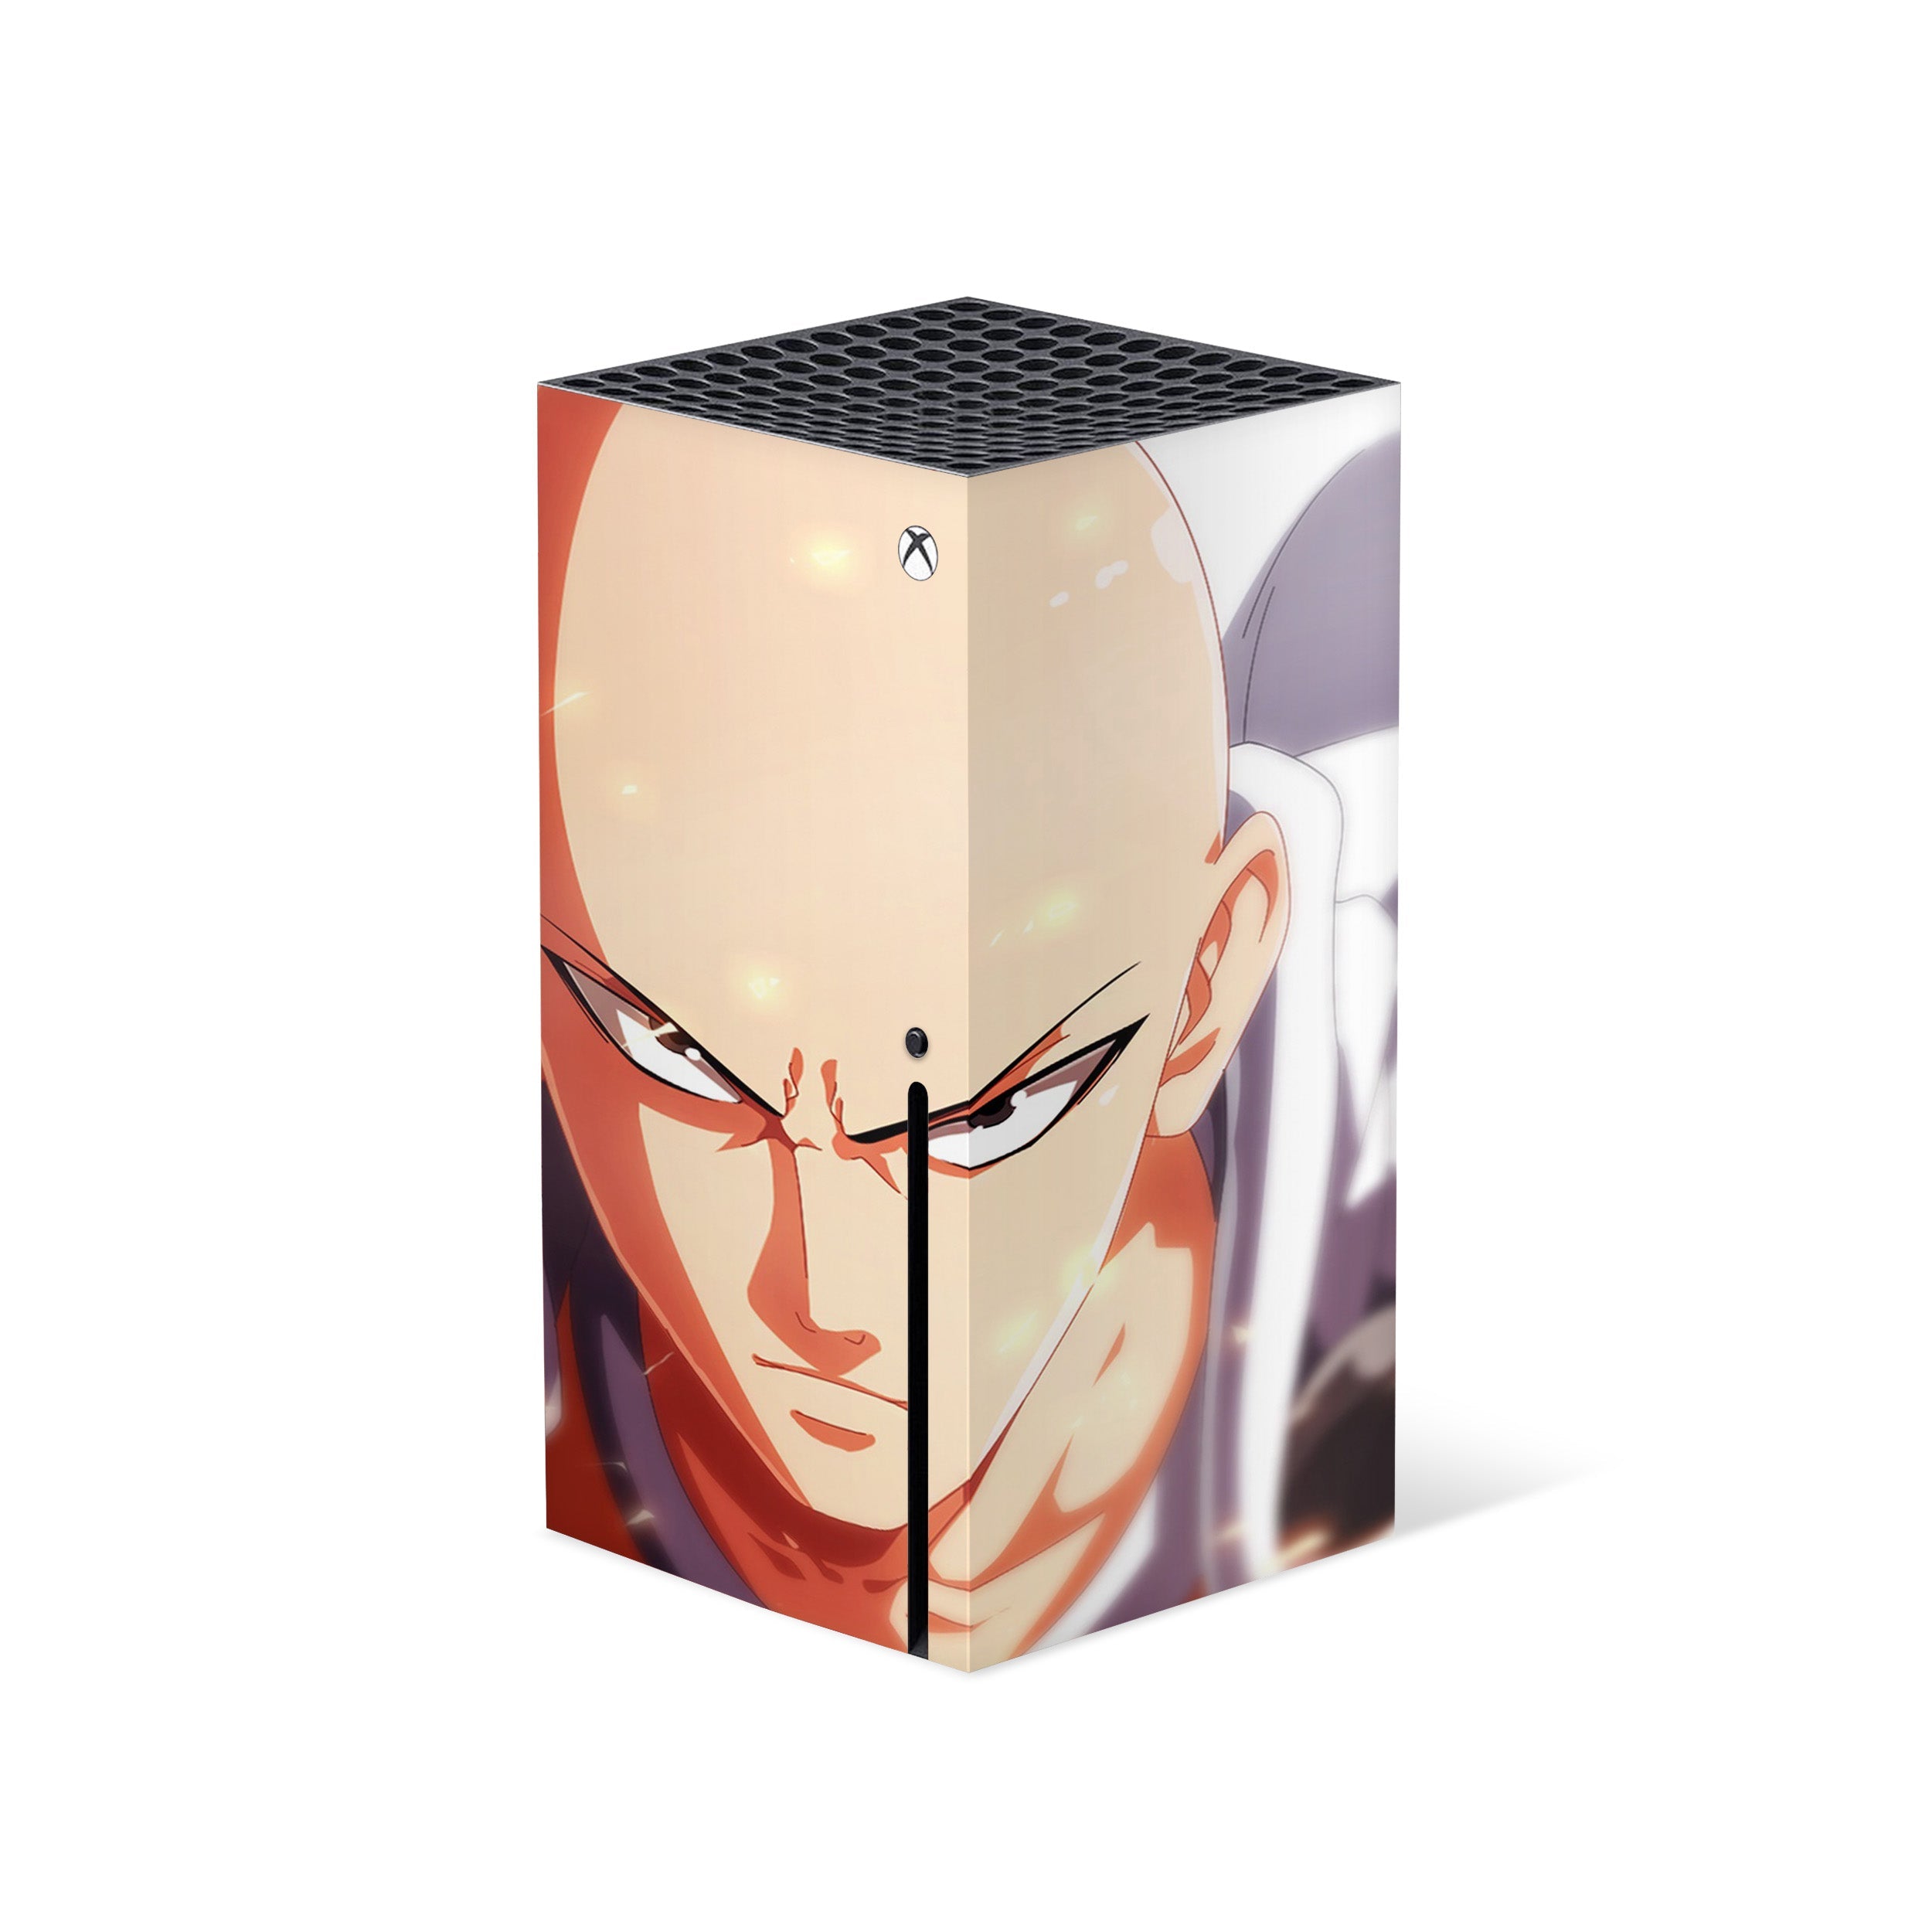 A video game skin featuring a One Punch Man Saitama design for the Xbox Series X.